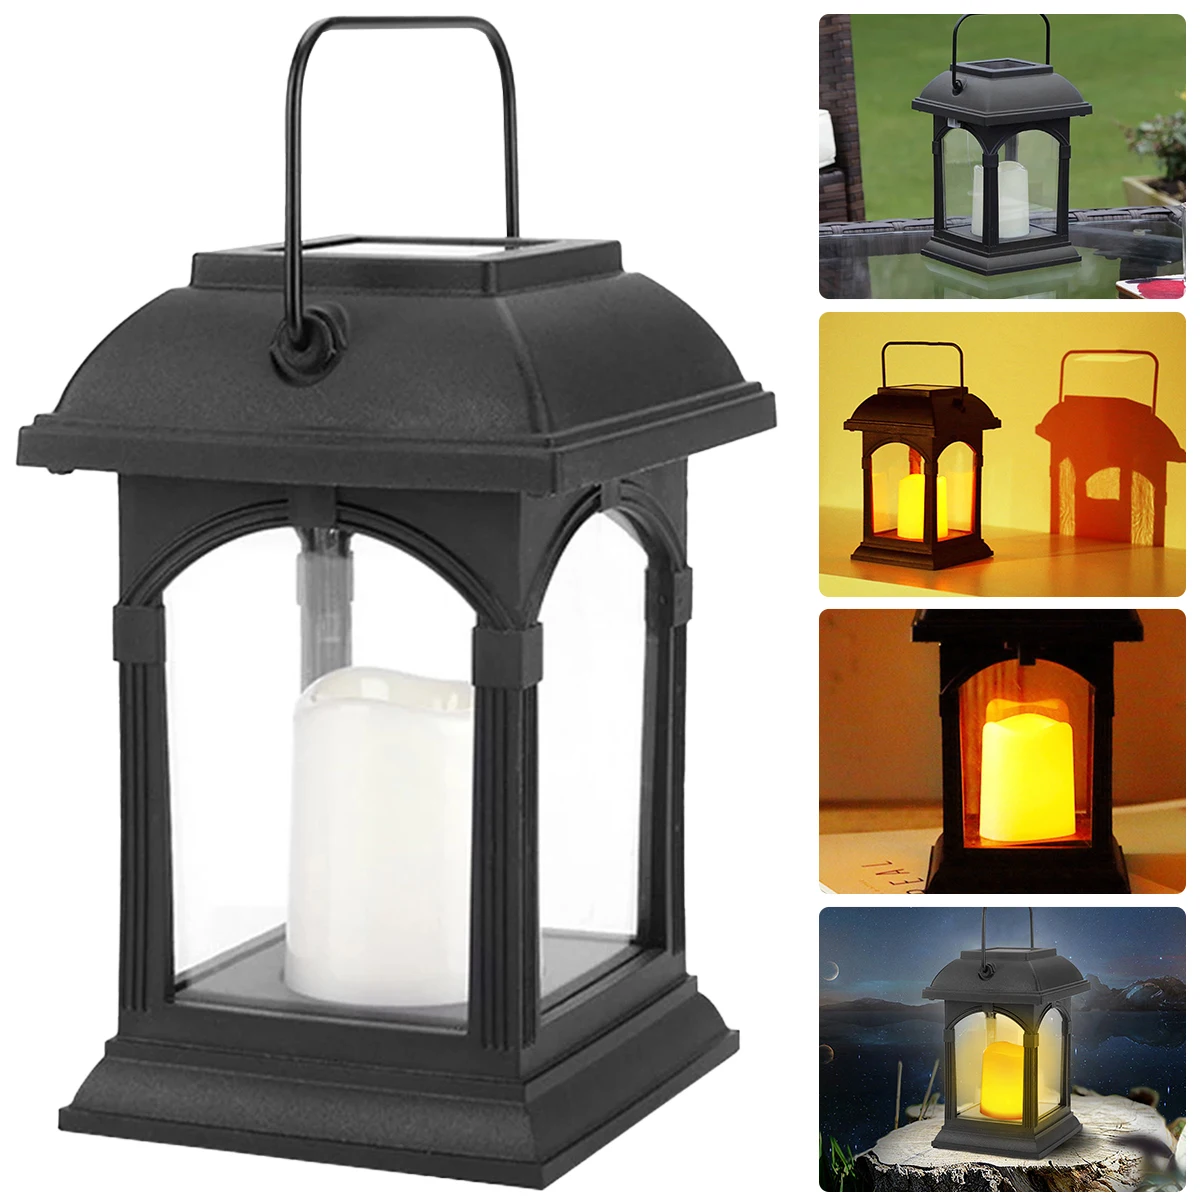 

Solar Handle Candle Lamp Solar Candle Holder Lantern Reusable IP44 Waterproof Hanging LED Light Solar Powered Outdoor Garden